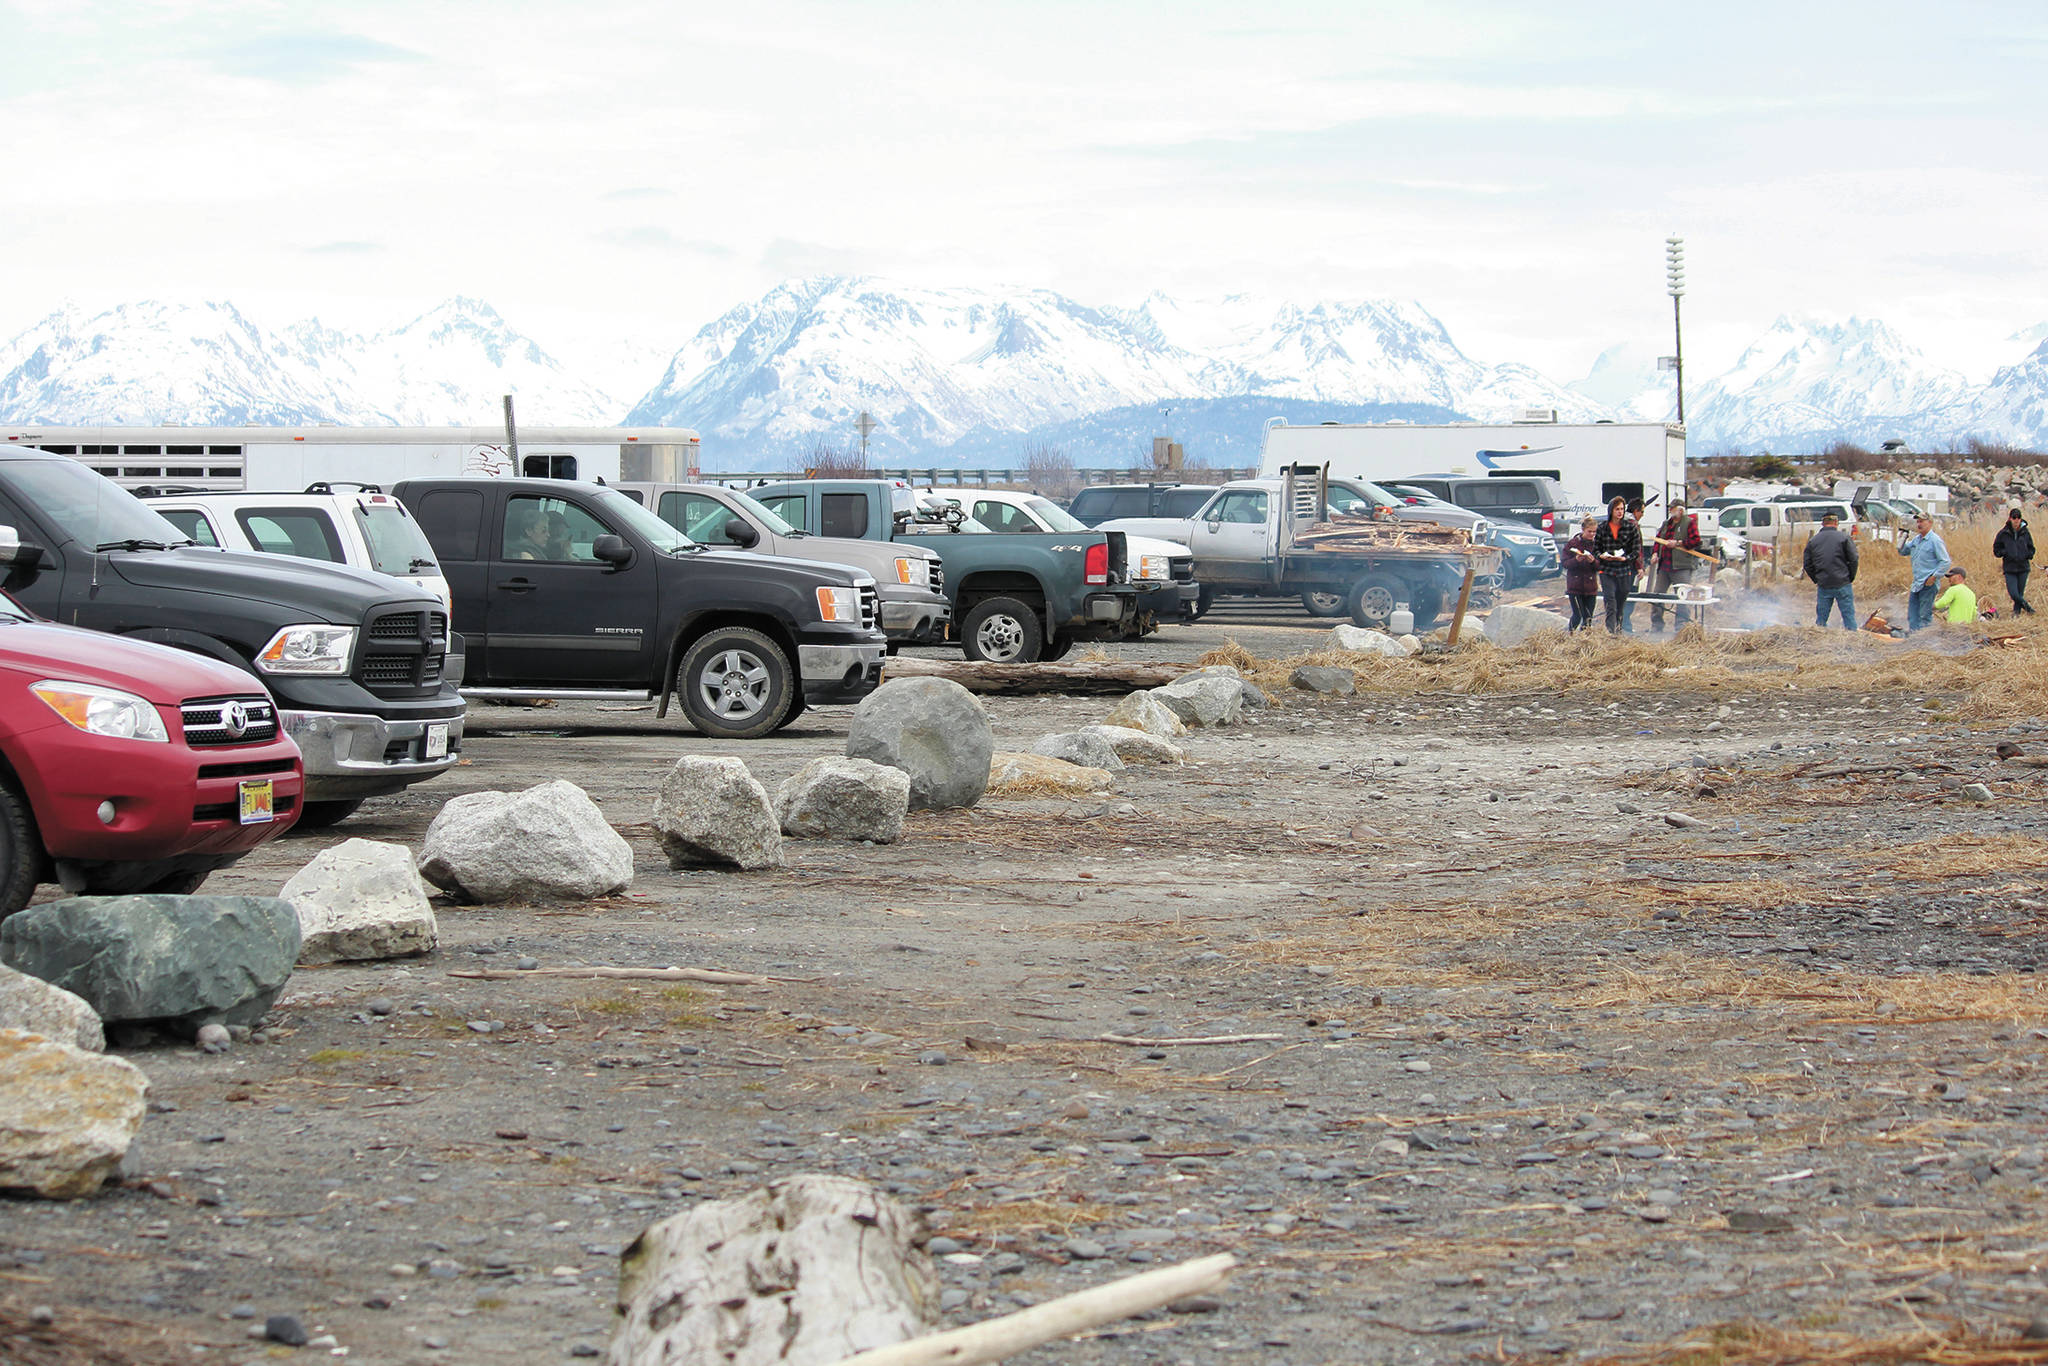 Cars line the parking lot at Mariner Park while participants in a community gathering and barbecue event spend time together on the beach Saturday, April 18, 2020 at the park in Homer, Alaska. The gathering was held by the Homer’s Sons of Liberty while the state health mandate that bans all in-person gatherings was still in place. (Photo by Megan Pacer/Homer News)